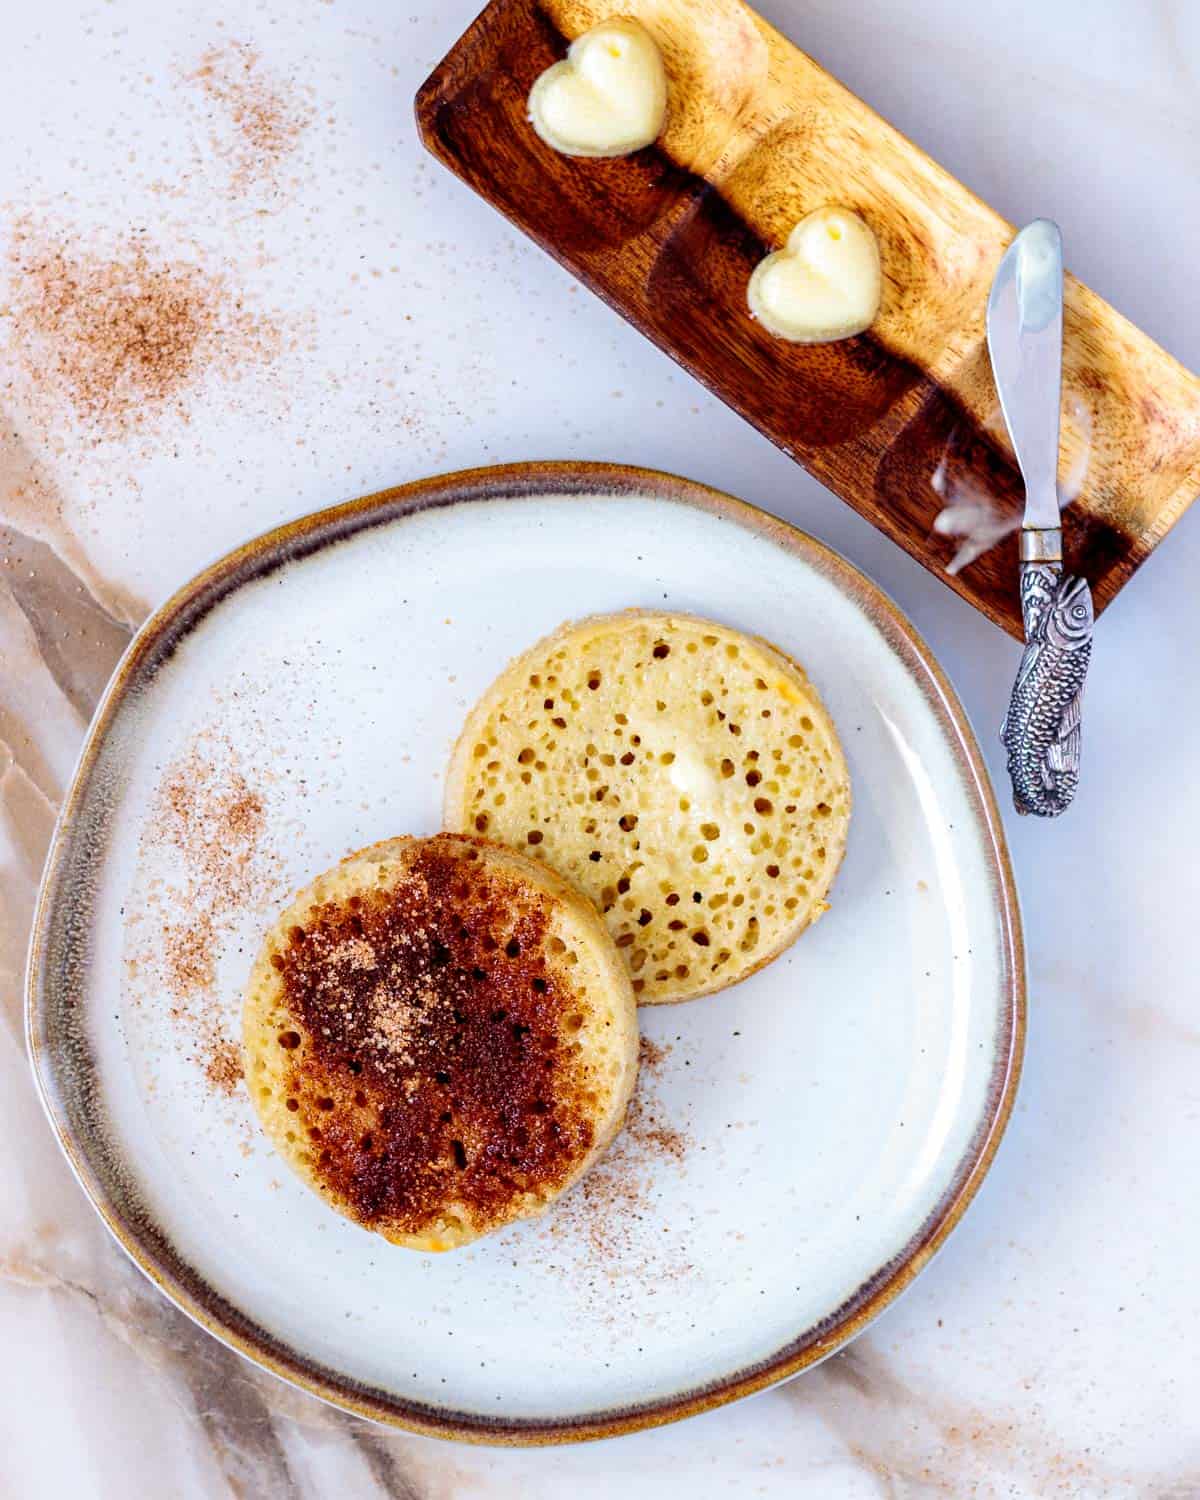 Two buttered crumpets with cinnamon sugar on half.